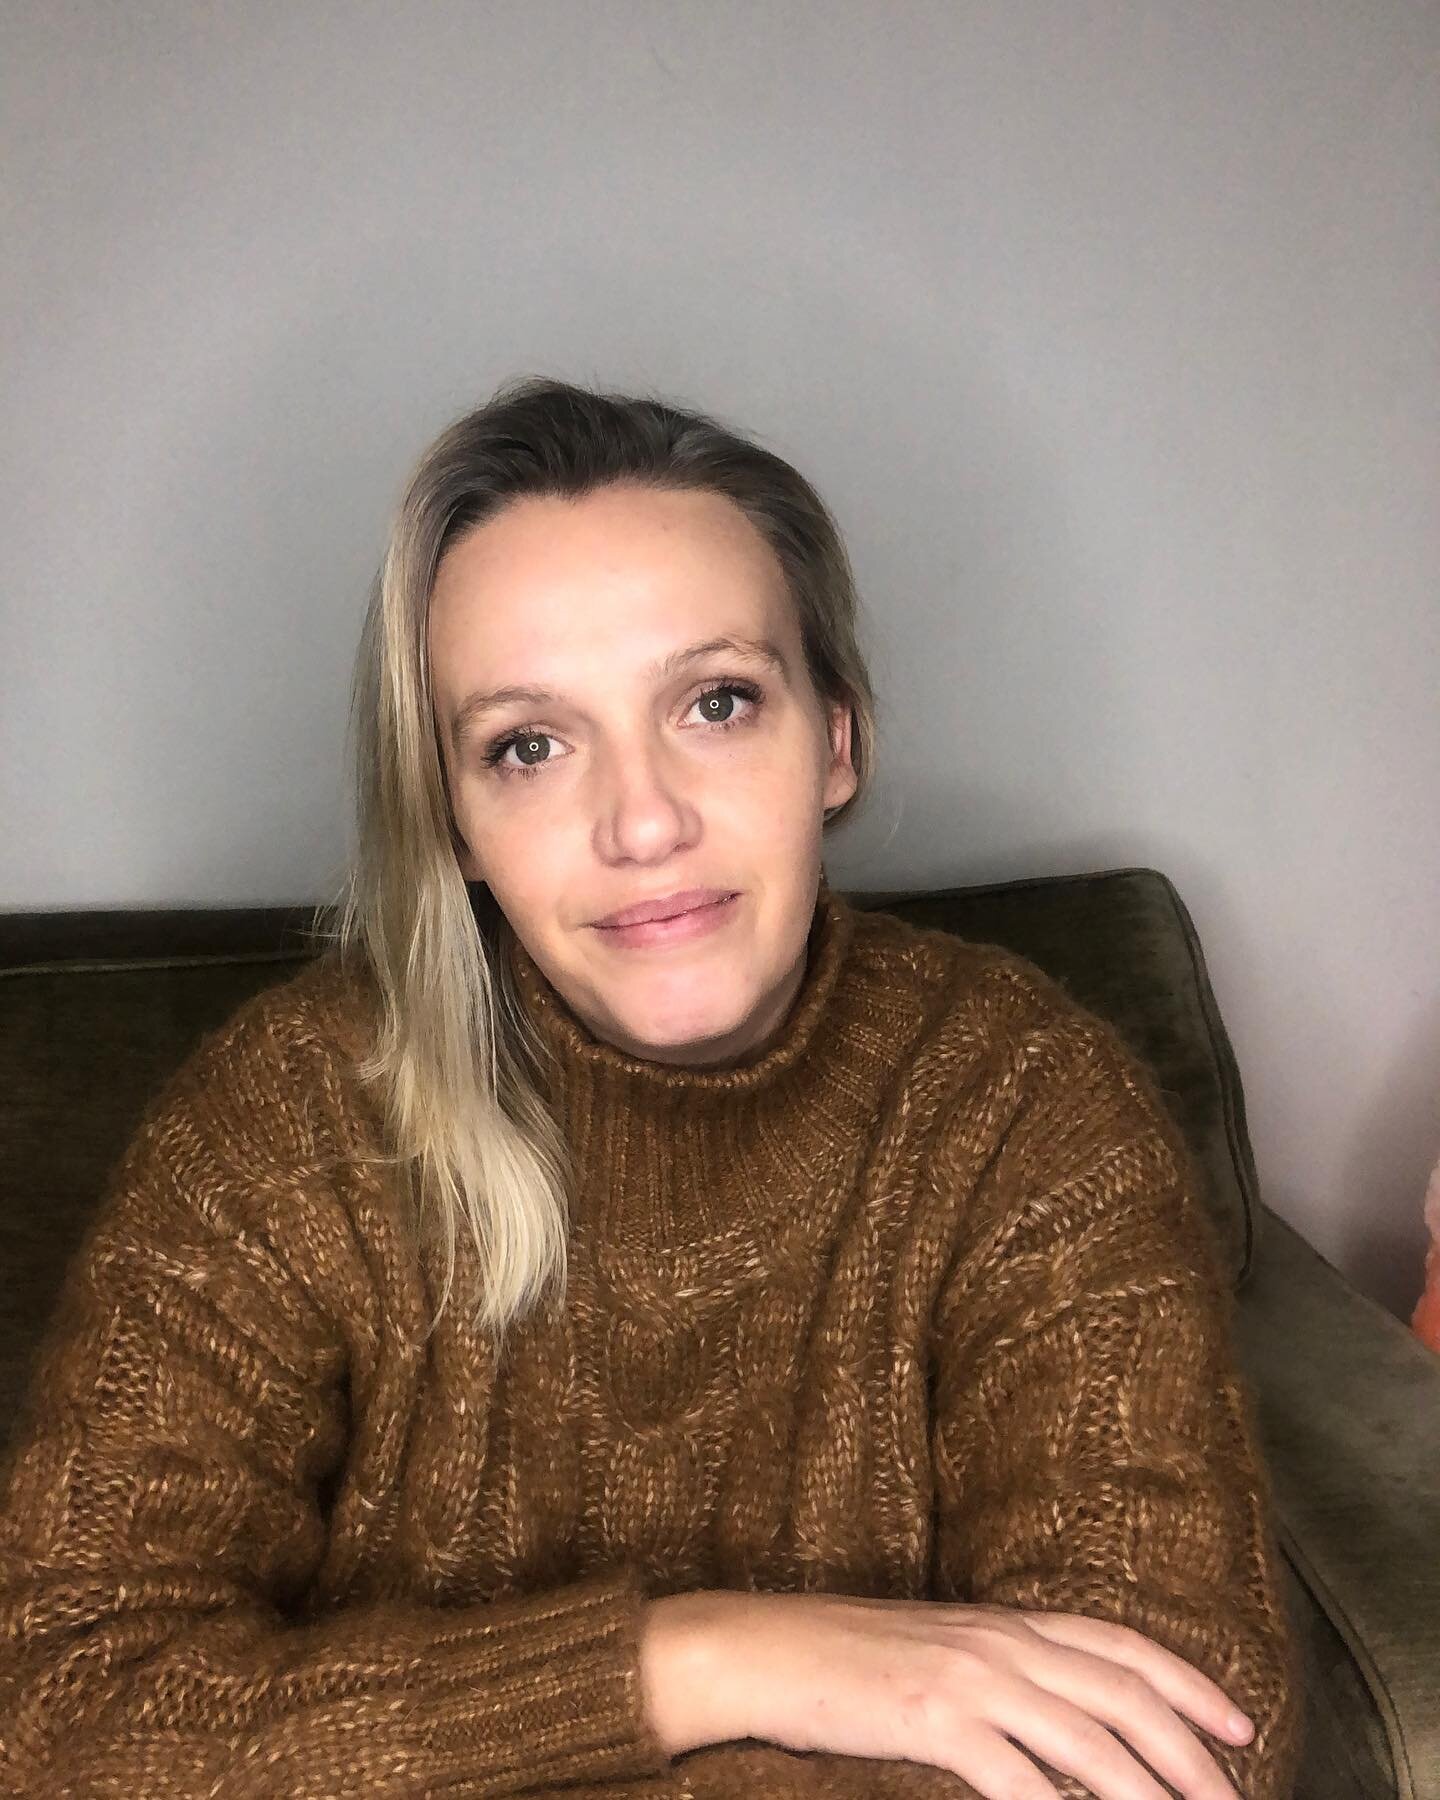 How are those lockdown feels? I&rsquo;ve spent the day being interviewed by @iamellesteele for her Star Gazers online community. We chatted about self-worth and my personal story. I&rsquo;ve also served clients via Zoom. All this whilst camouflaging 